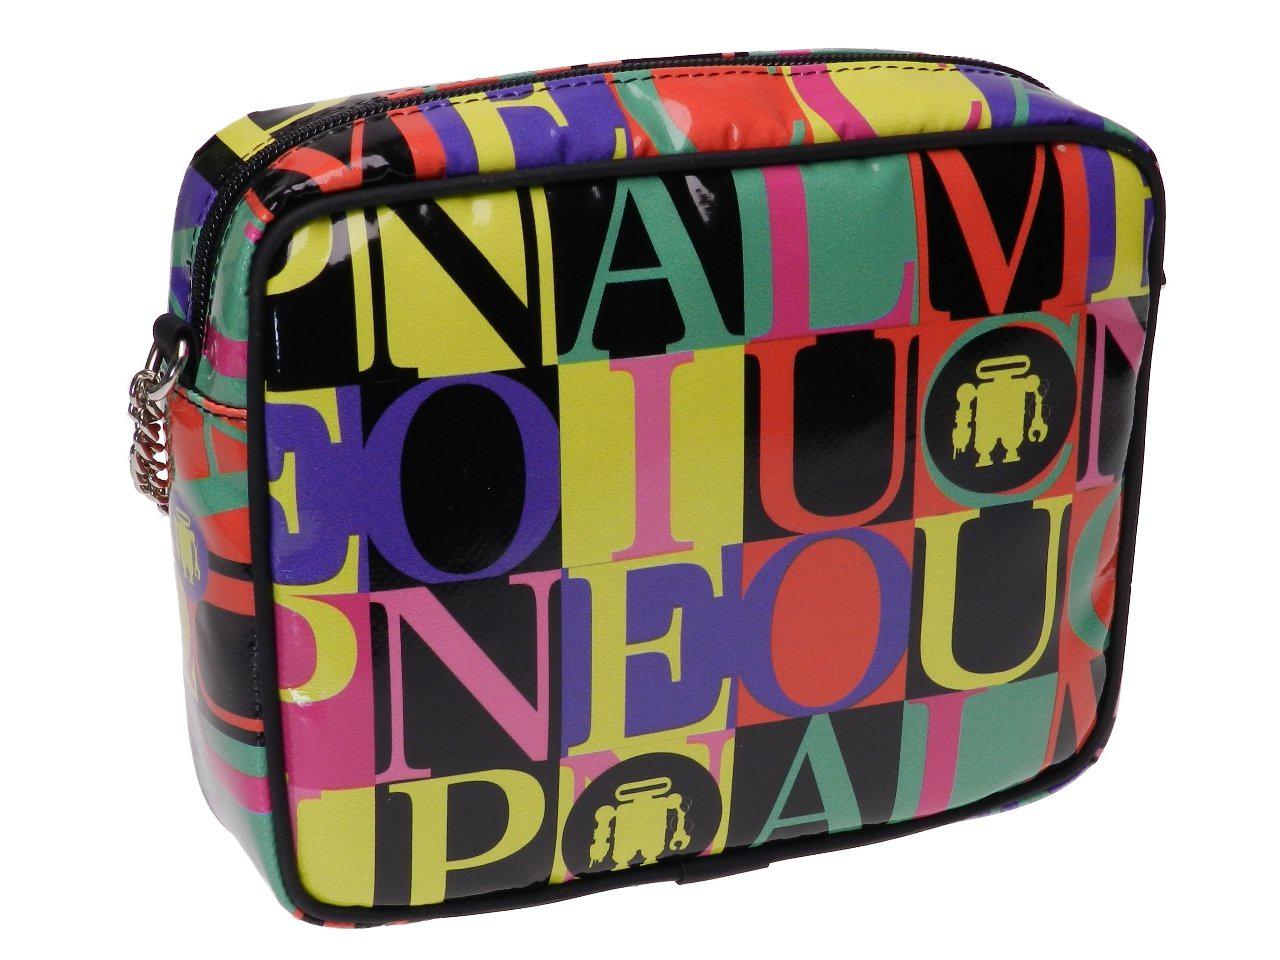 CLUTCH MULTICOLOR LETTERING FANTASY. PARK MODEL MADE OF LORRY TARPAULIN. - Limited Edition Paul Meccanico